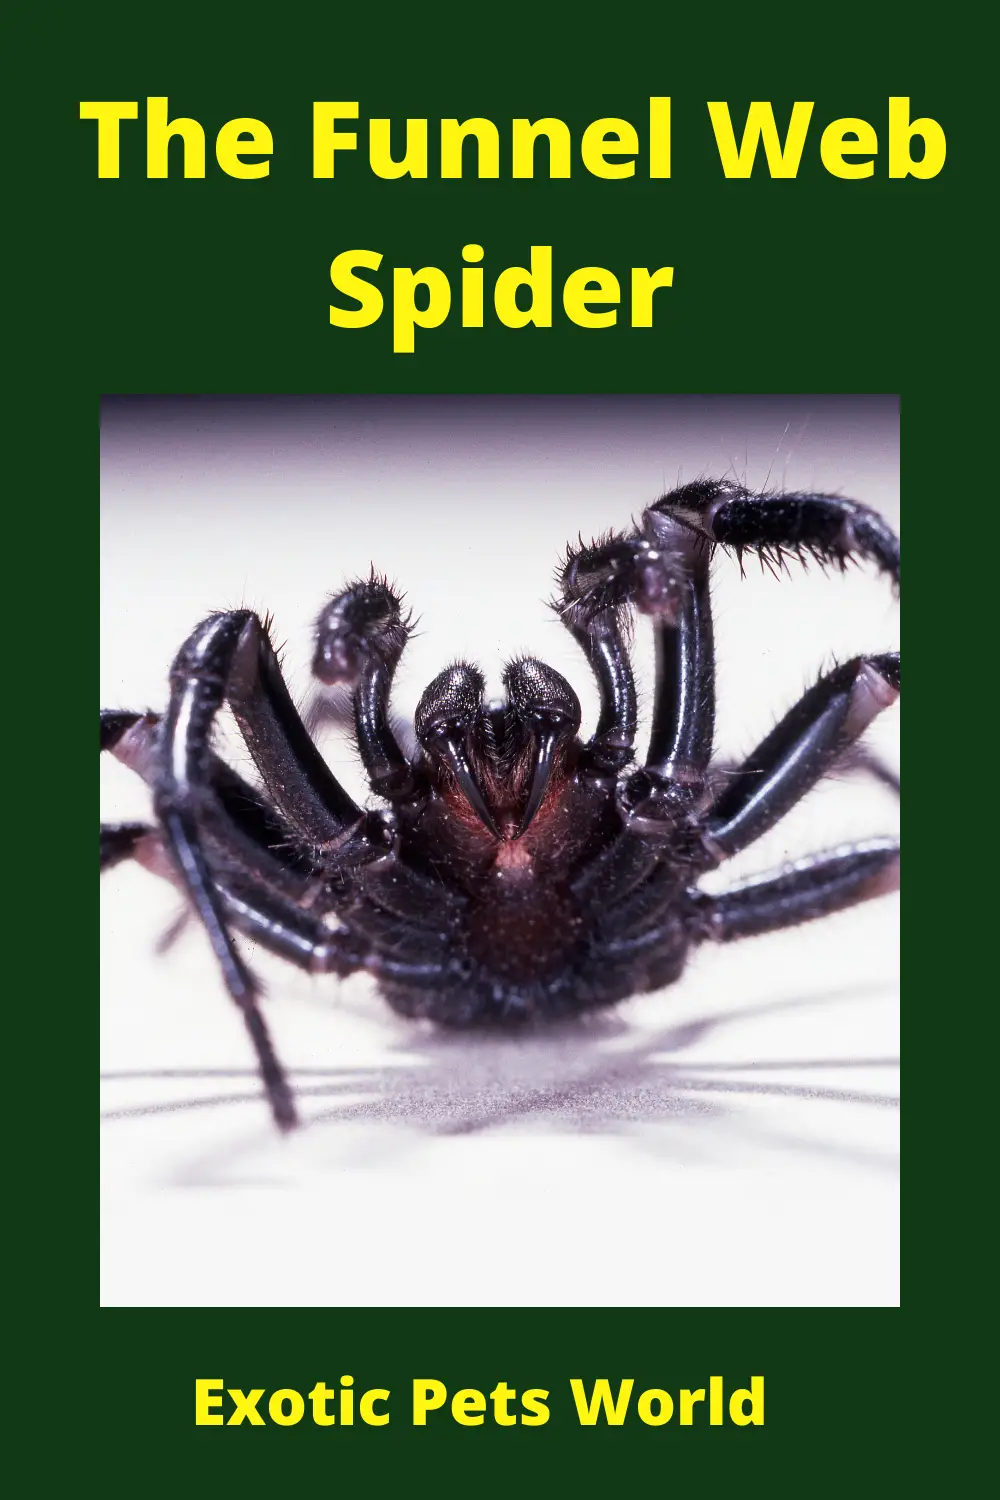 do funnel web spiders travel in pairs